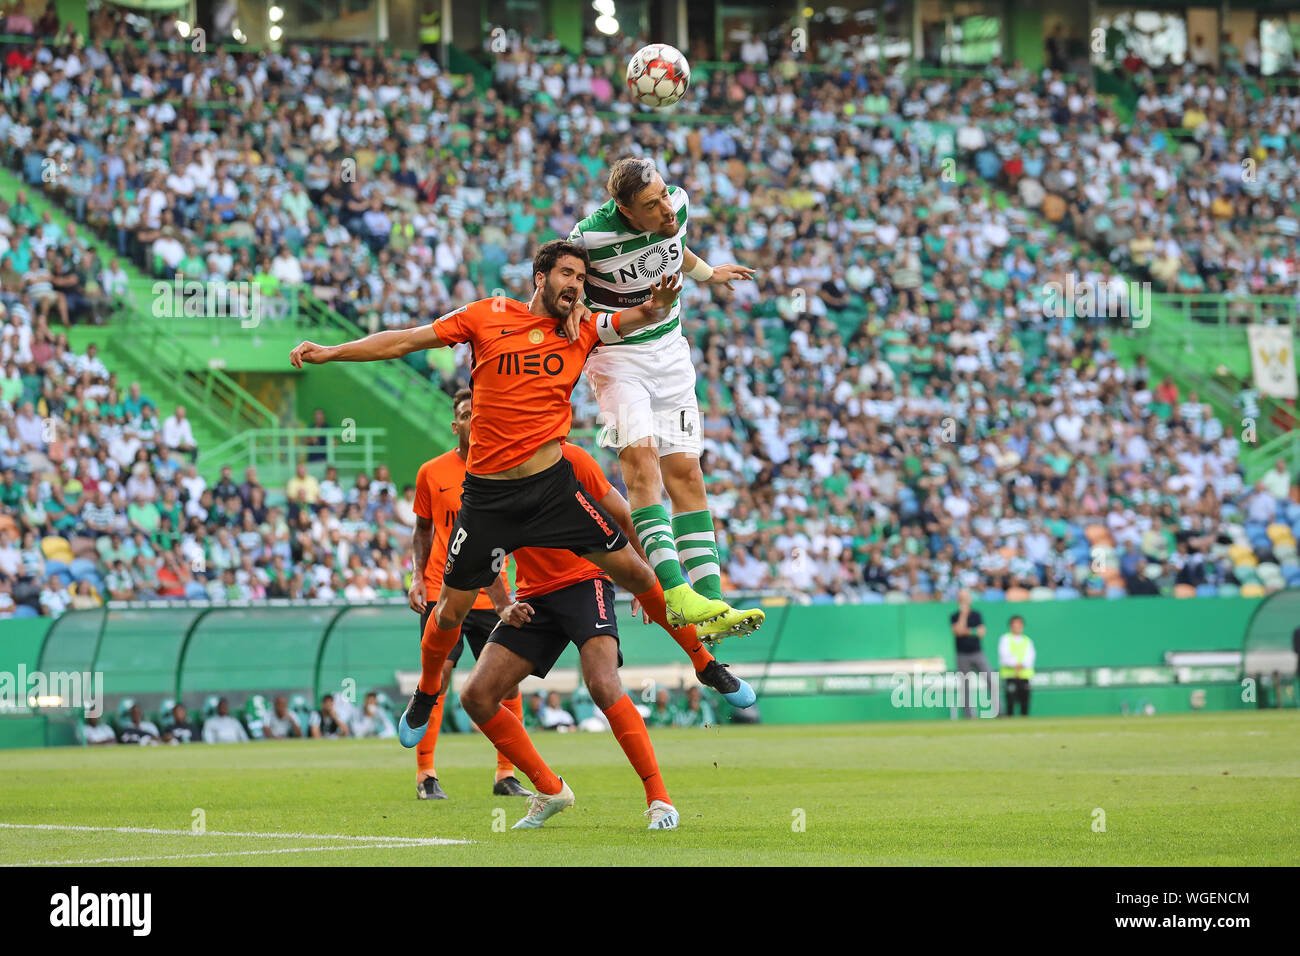 Tarantini of Rio Ave FC (L) vies for the ball with Sebastián Coates of Sporting CP (R) during the League NOS 2019/20 football match between Sporting CP vs Rio Ave FC.(Final score: Sporting CP 2 - 3 Rio Ave FC) Stock Photo